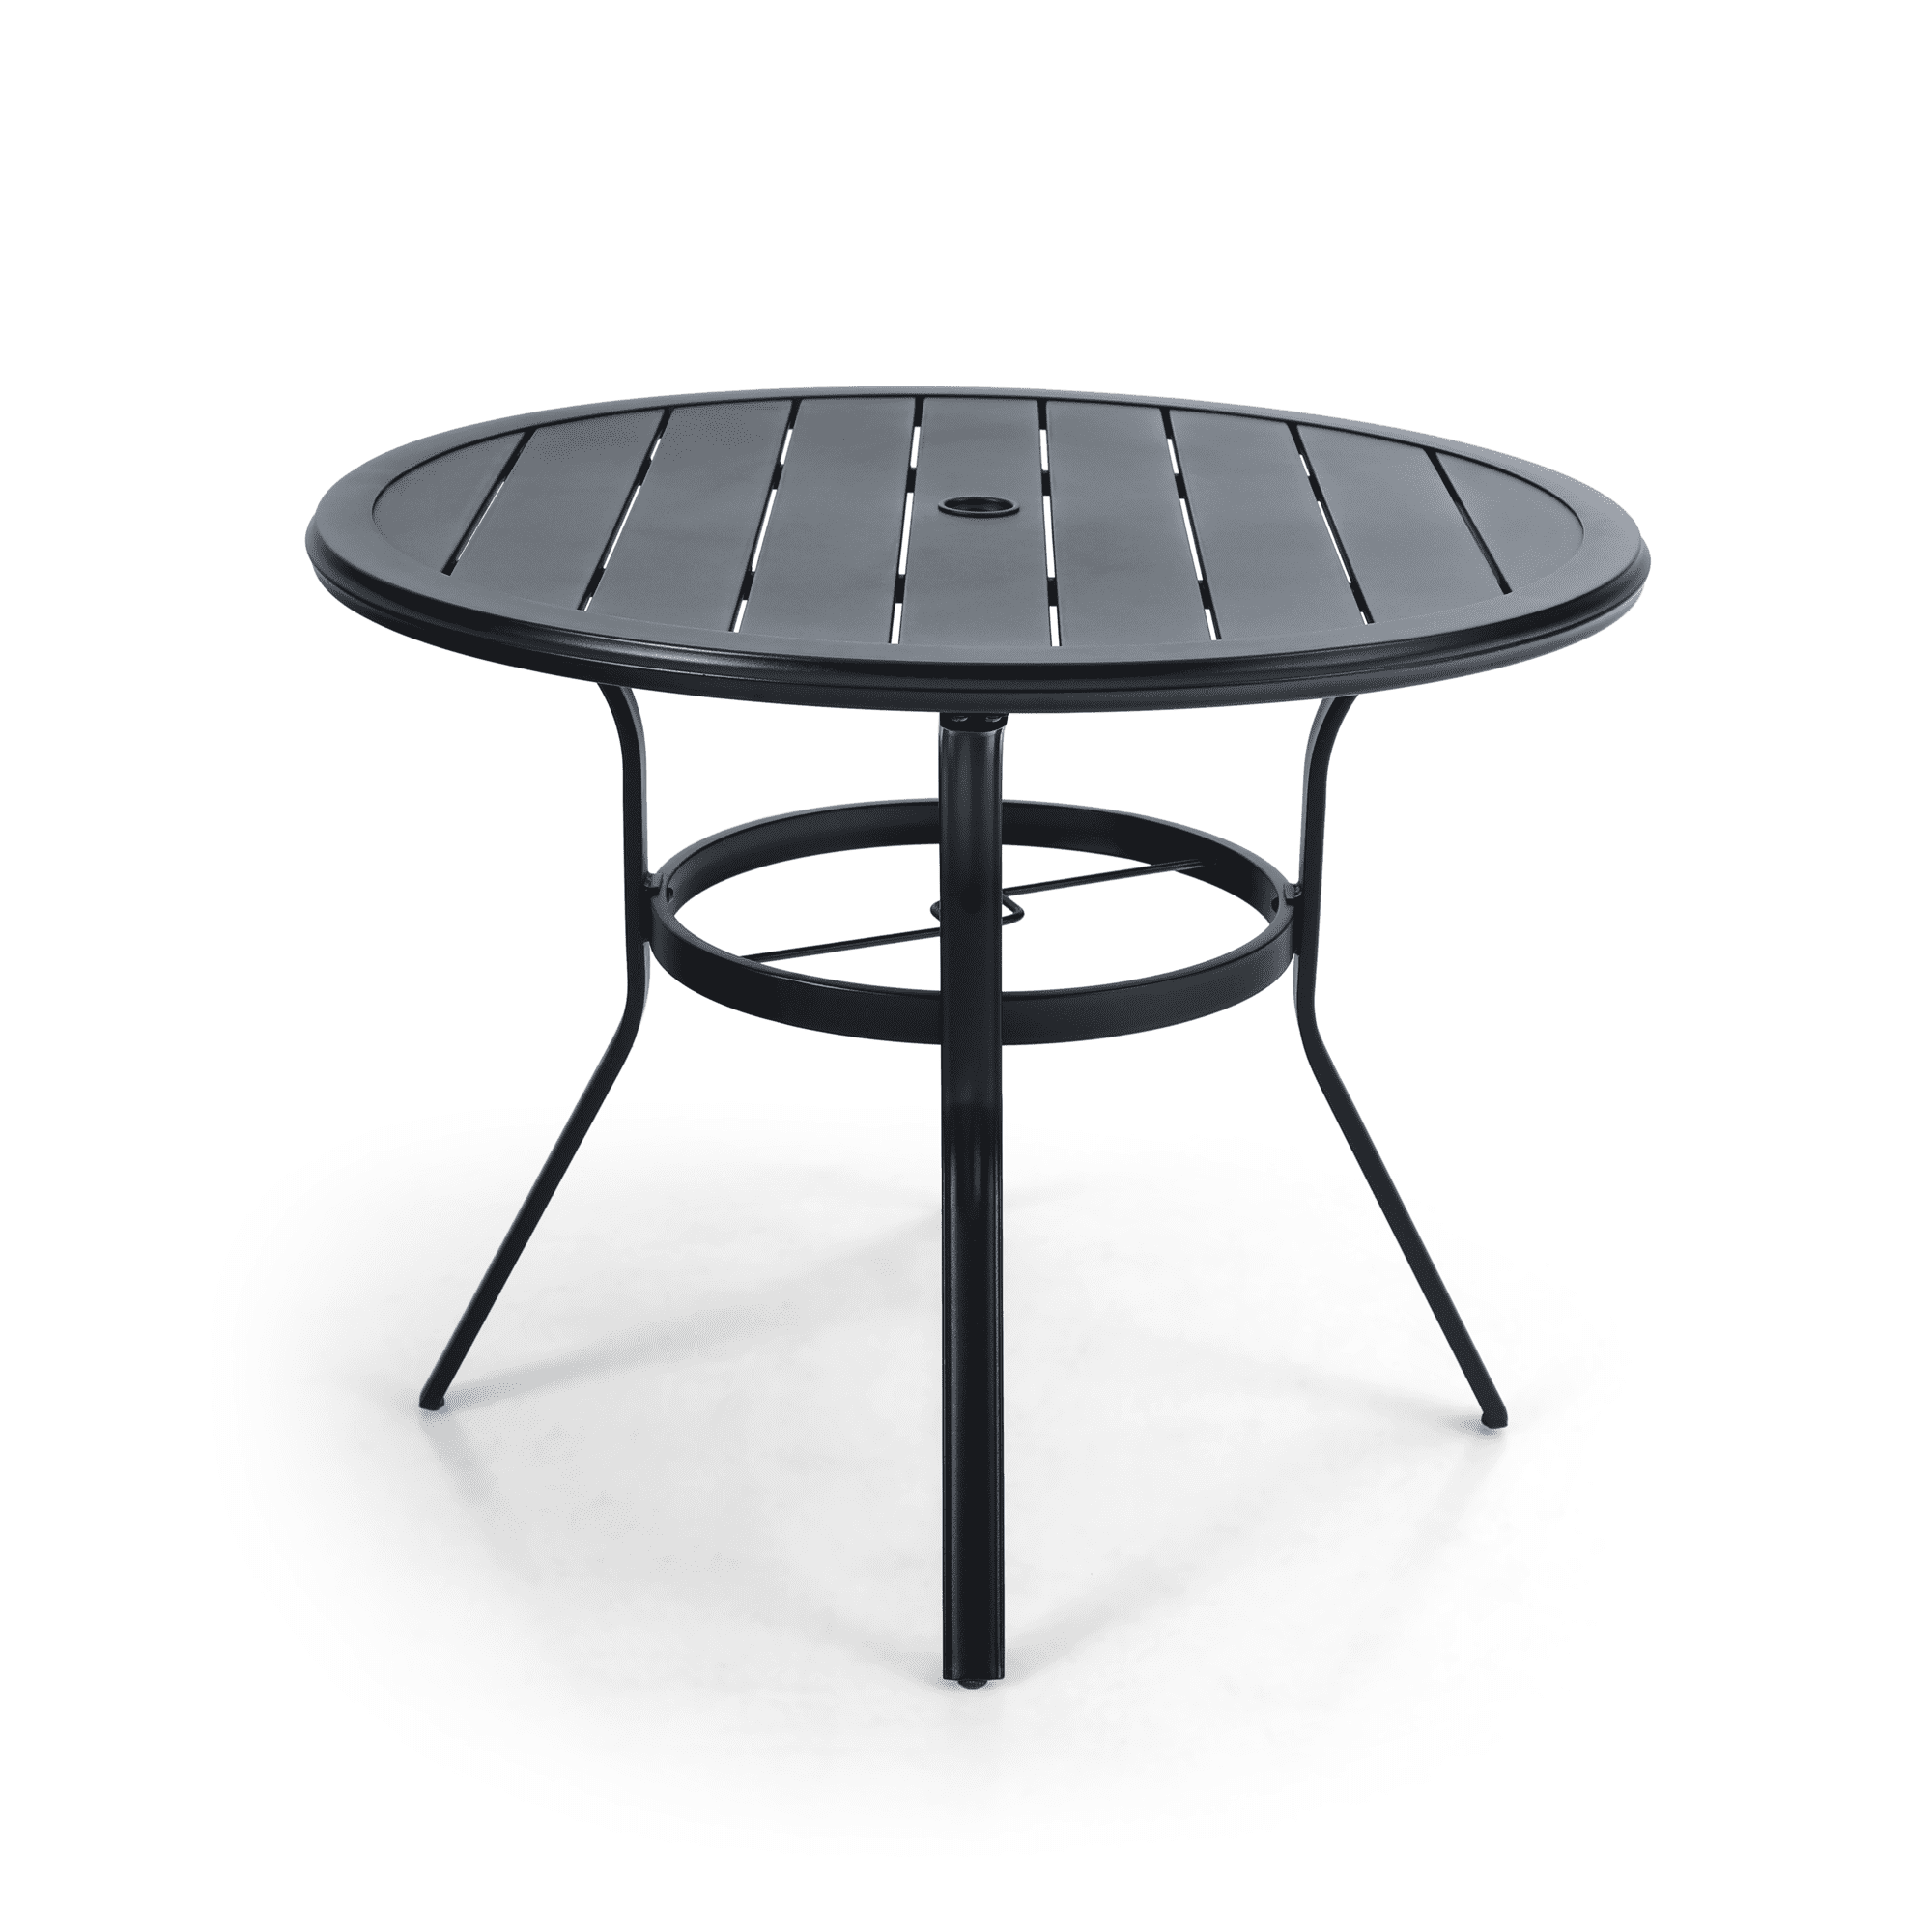 Sophia & William Outdoor Metal Round Dining Table for 4 Chairs